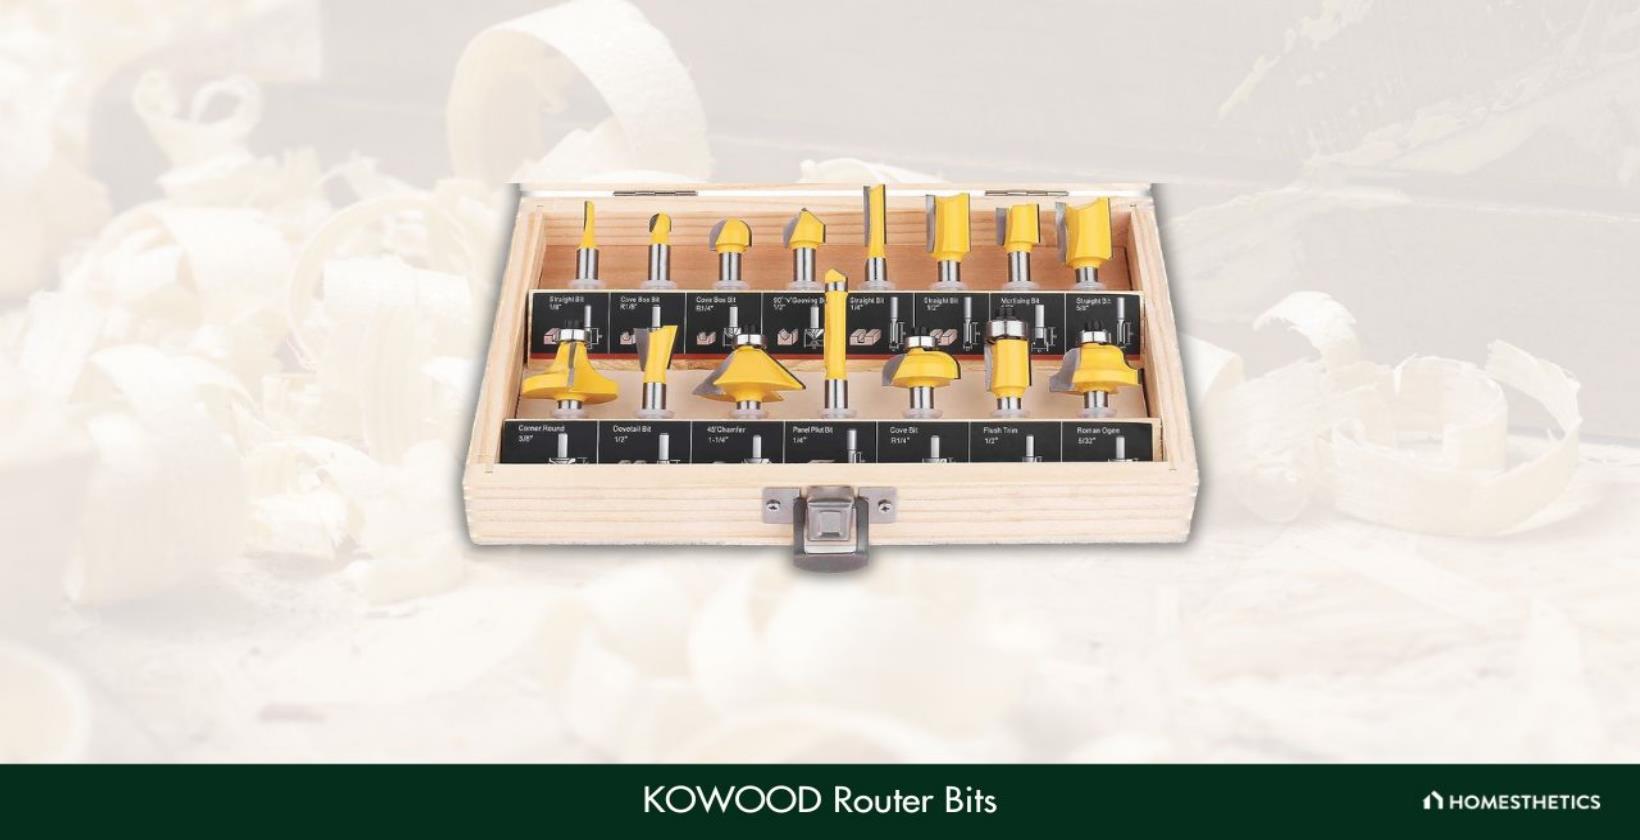 2. KOWOOD Router Bits